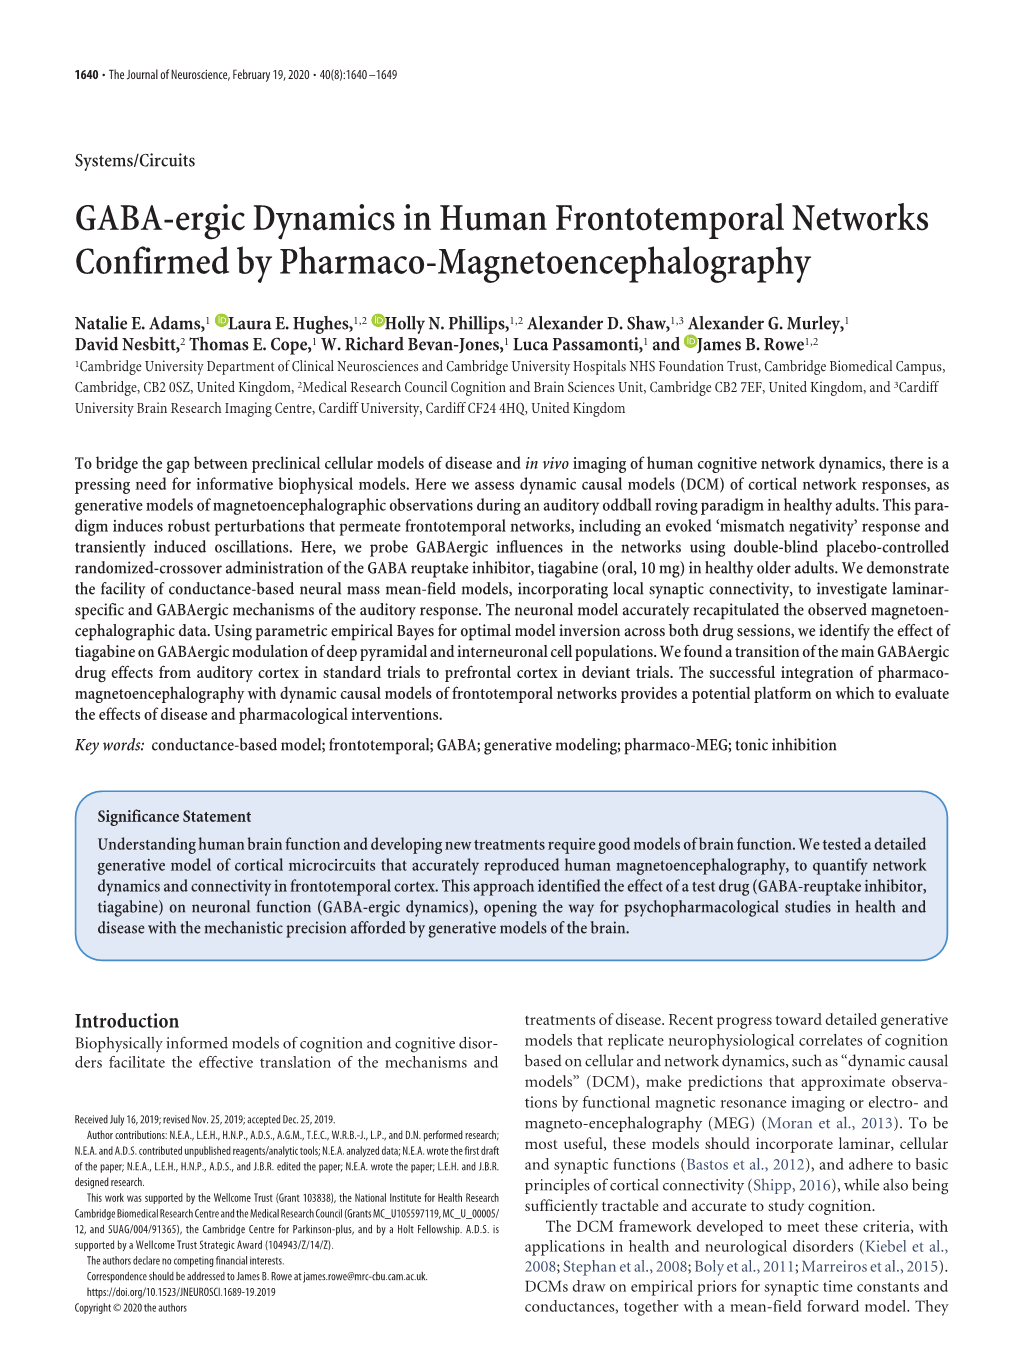 GABA-Ergic Dynamics in Human Frontotemporal Networks Confirmed by Pharmaco-Magnetoencephalography